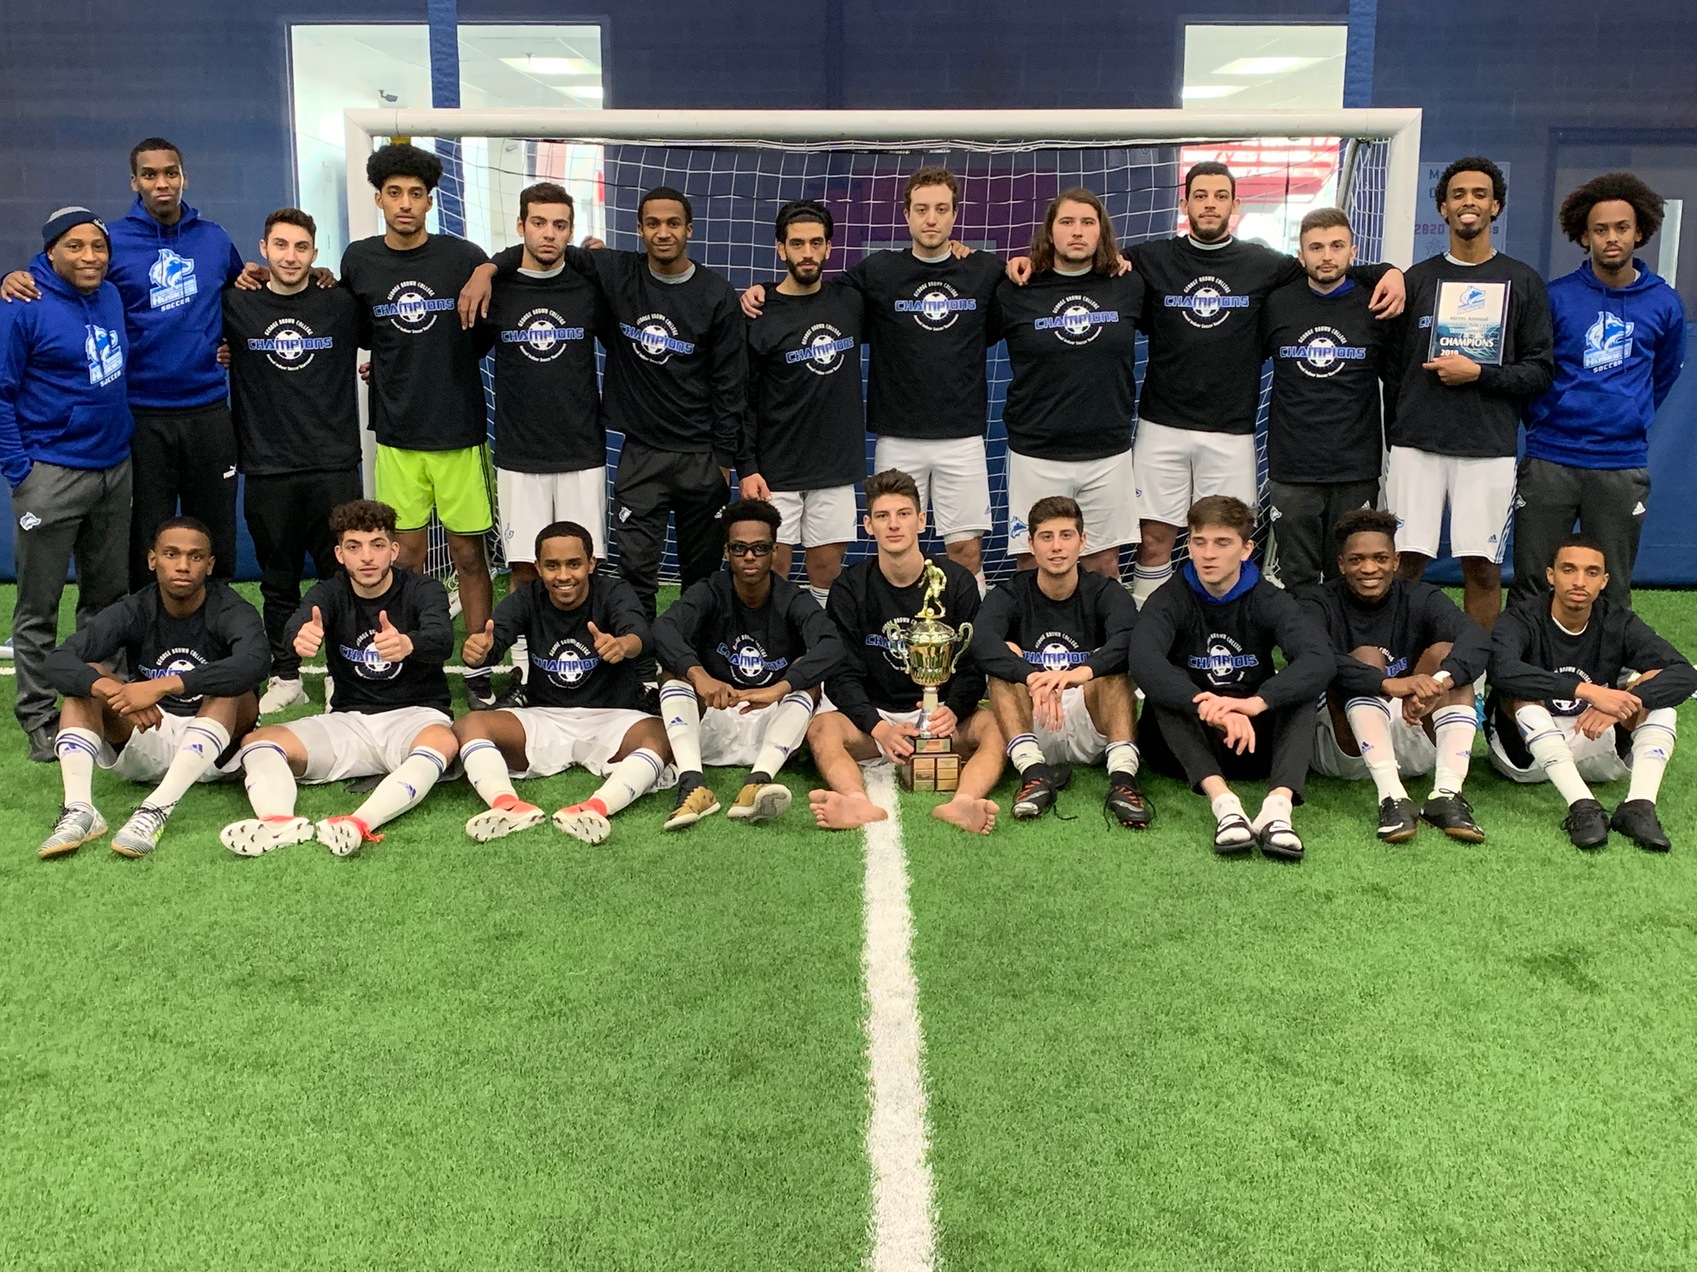 MEN'S INDOOR SOCCER PITCH SHUTOUT IN CLAIMING THIRD STRAIGHT HUSKIES INDOOR SOCCER TITLE